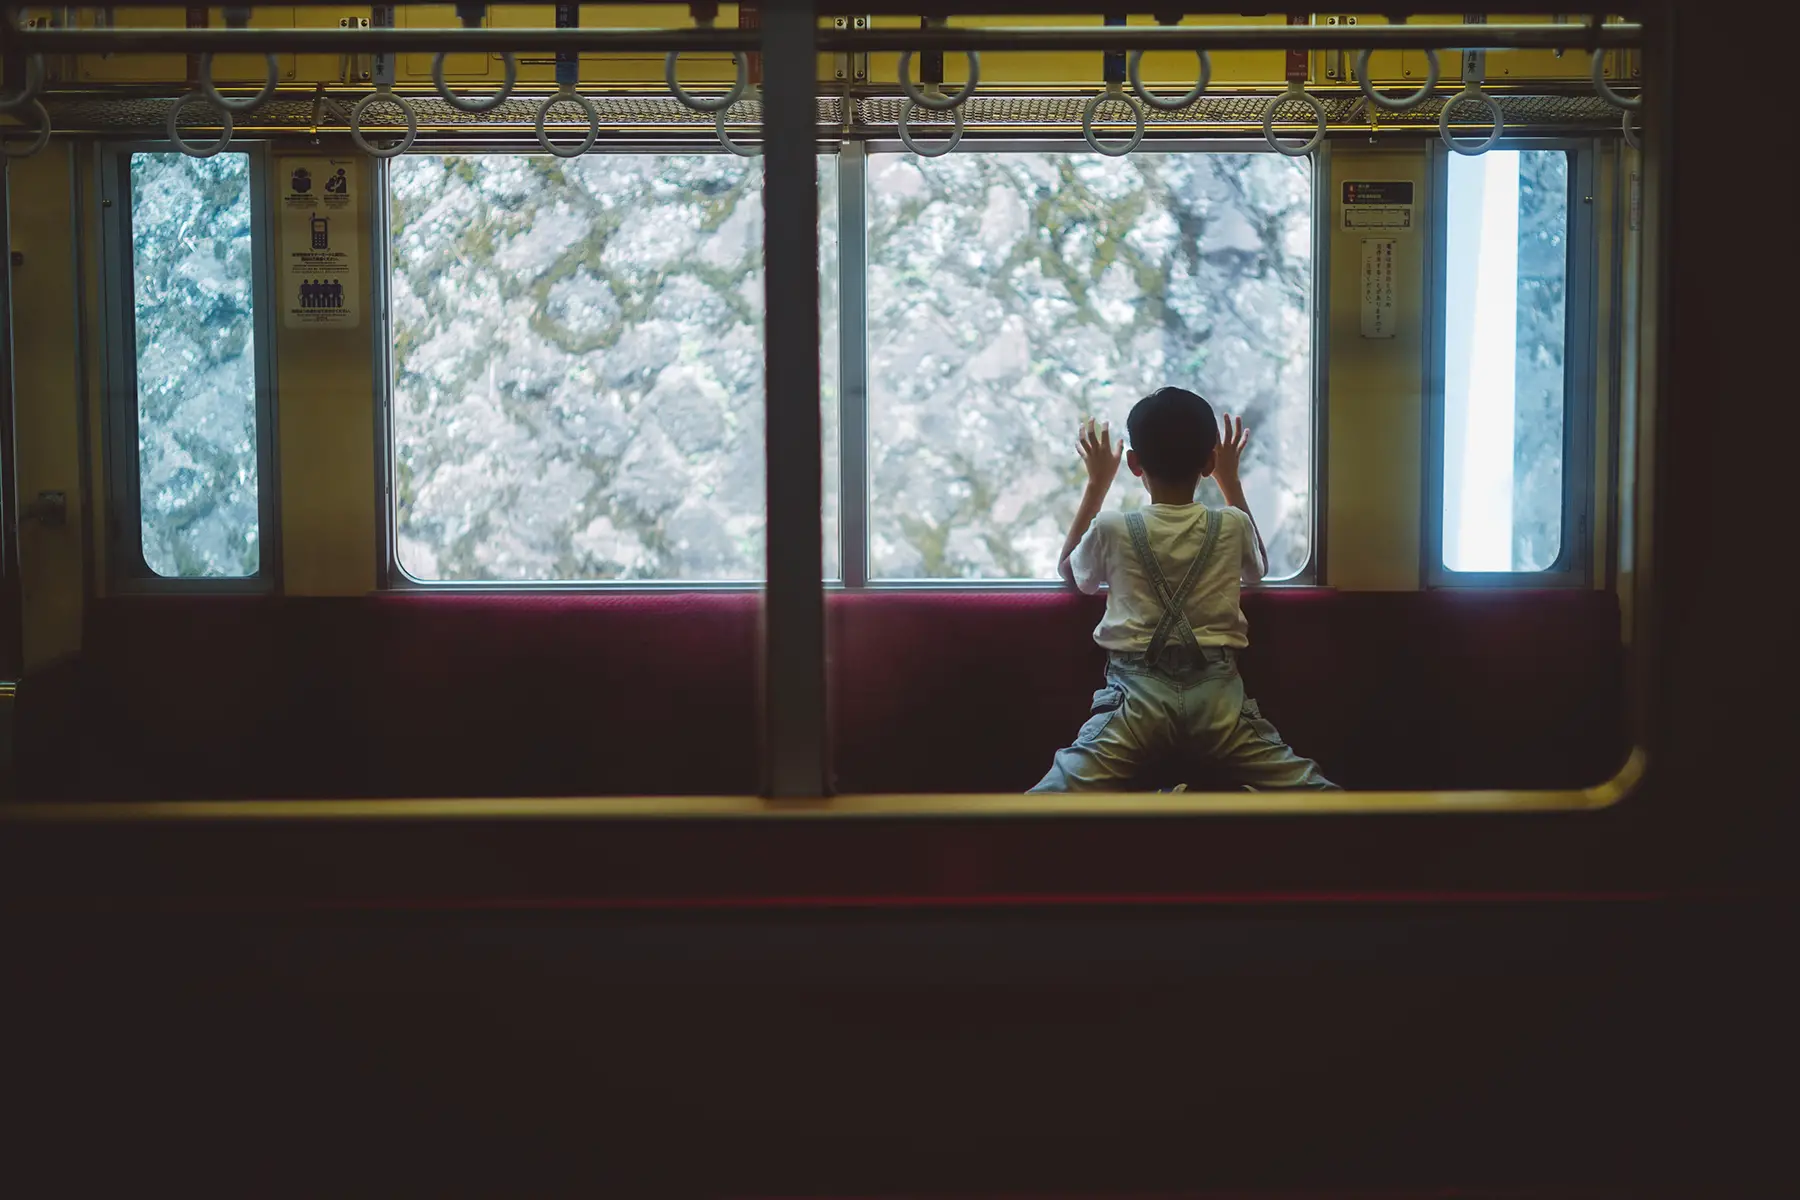 The silhouette of a child looking out a train window with both hands on the window - can only see their back, no other passengers in the carriage